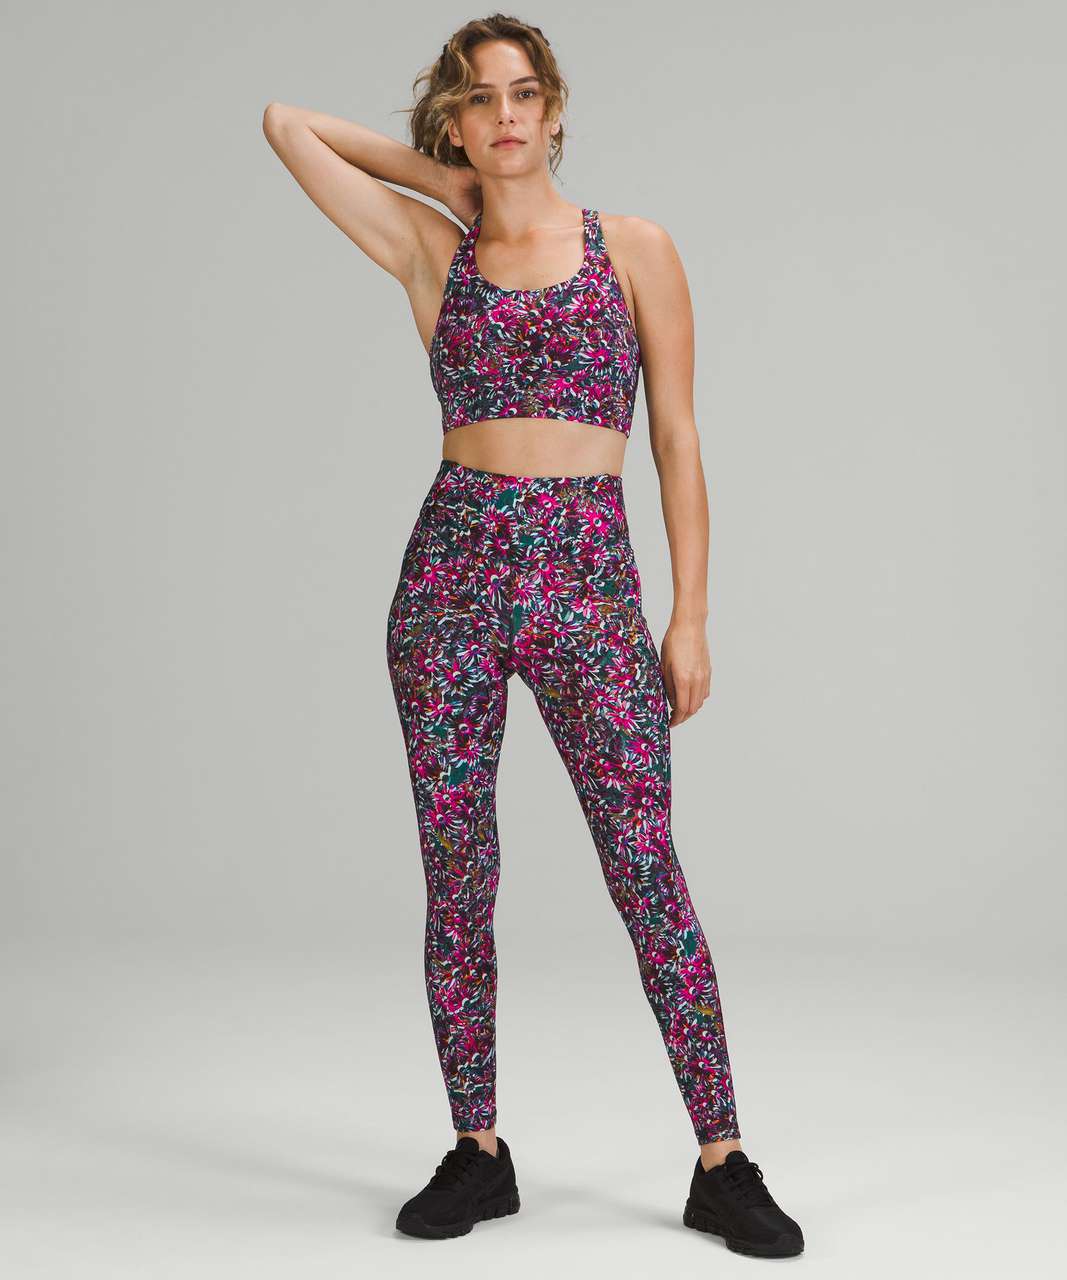 Lululemon athletica Base Pace High-Rise Tight 28